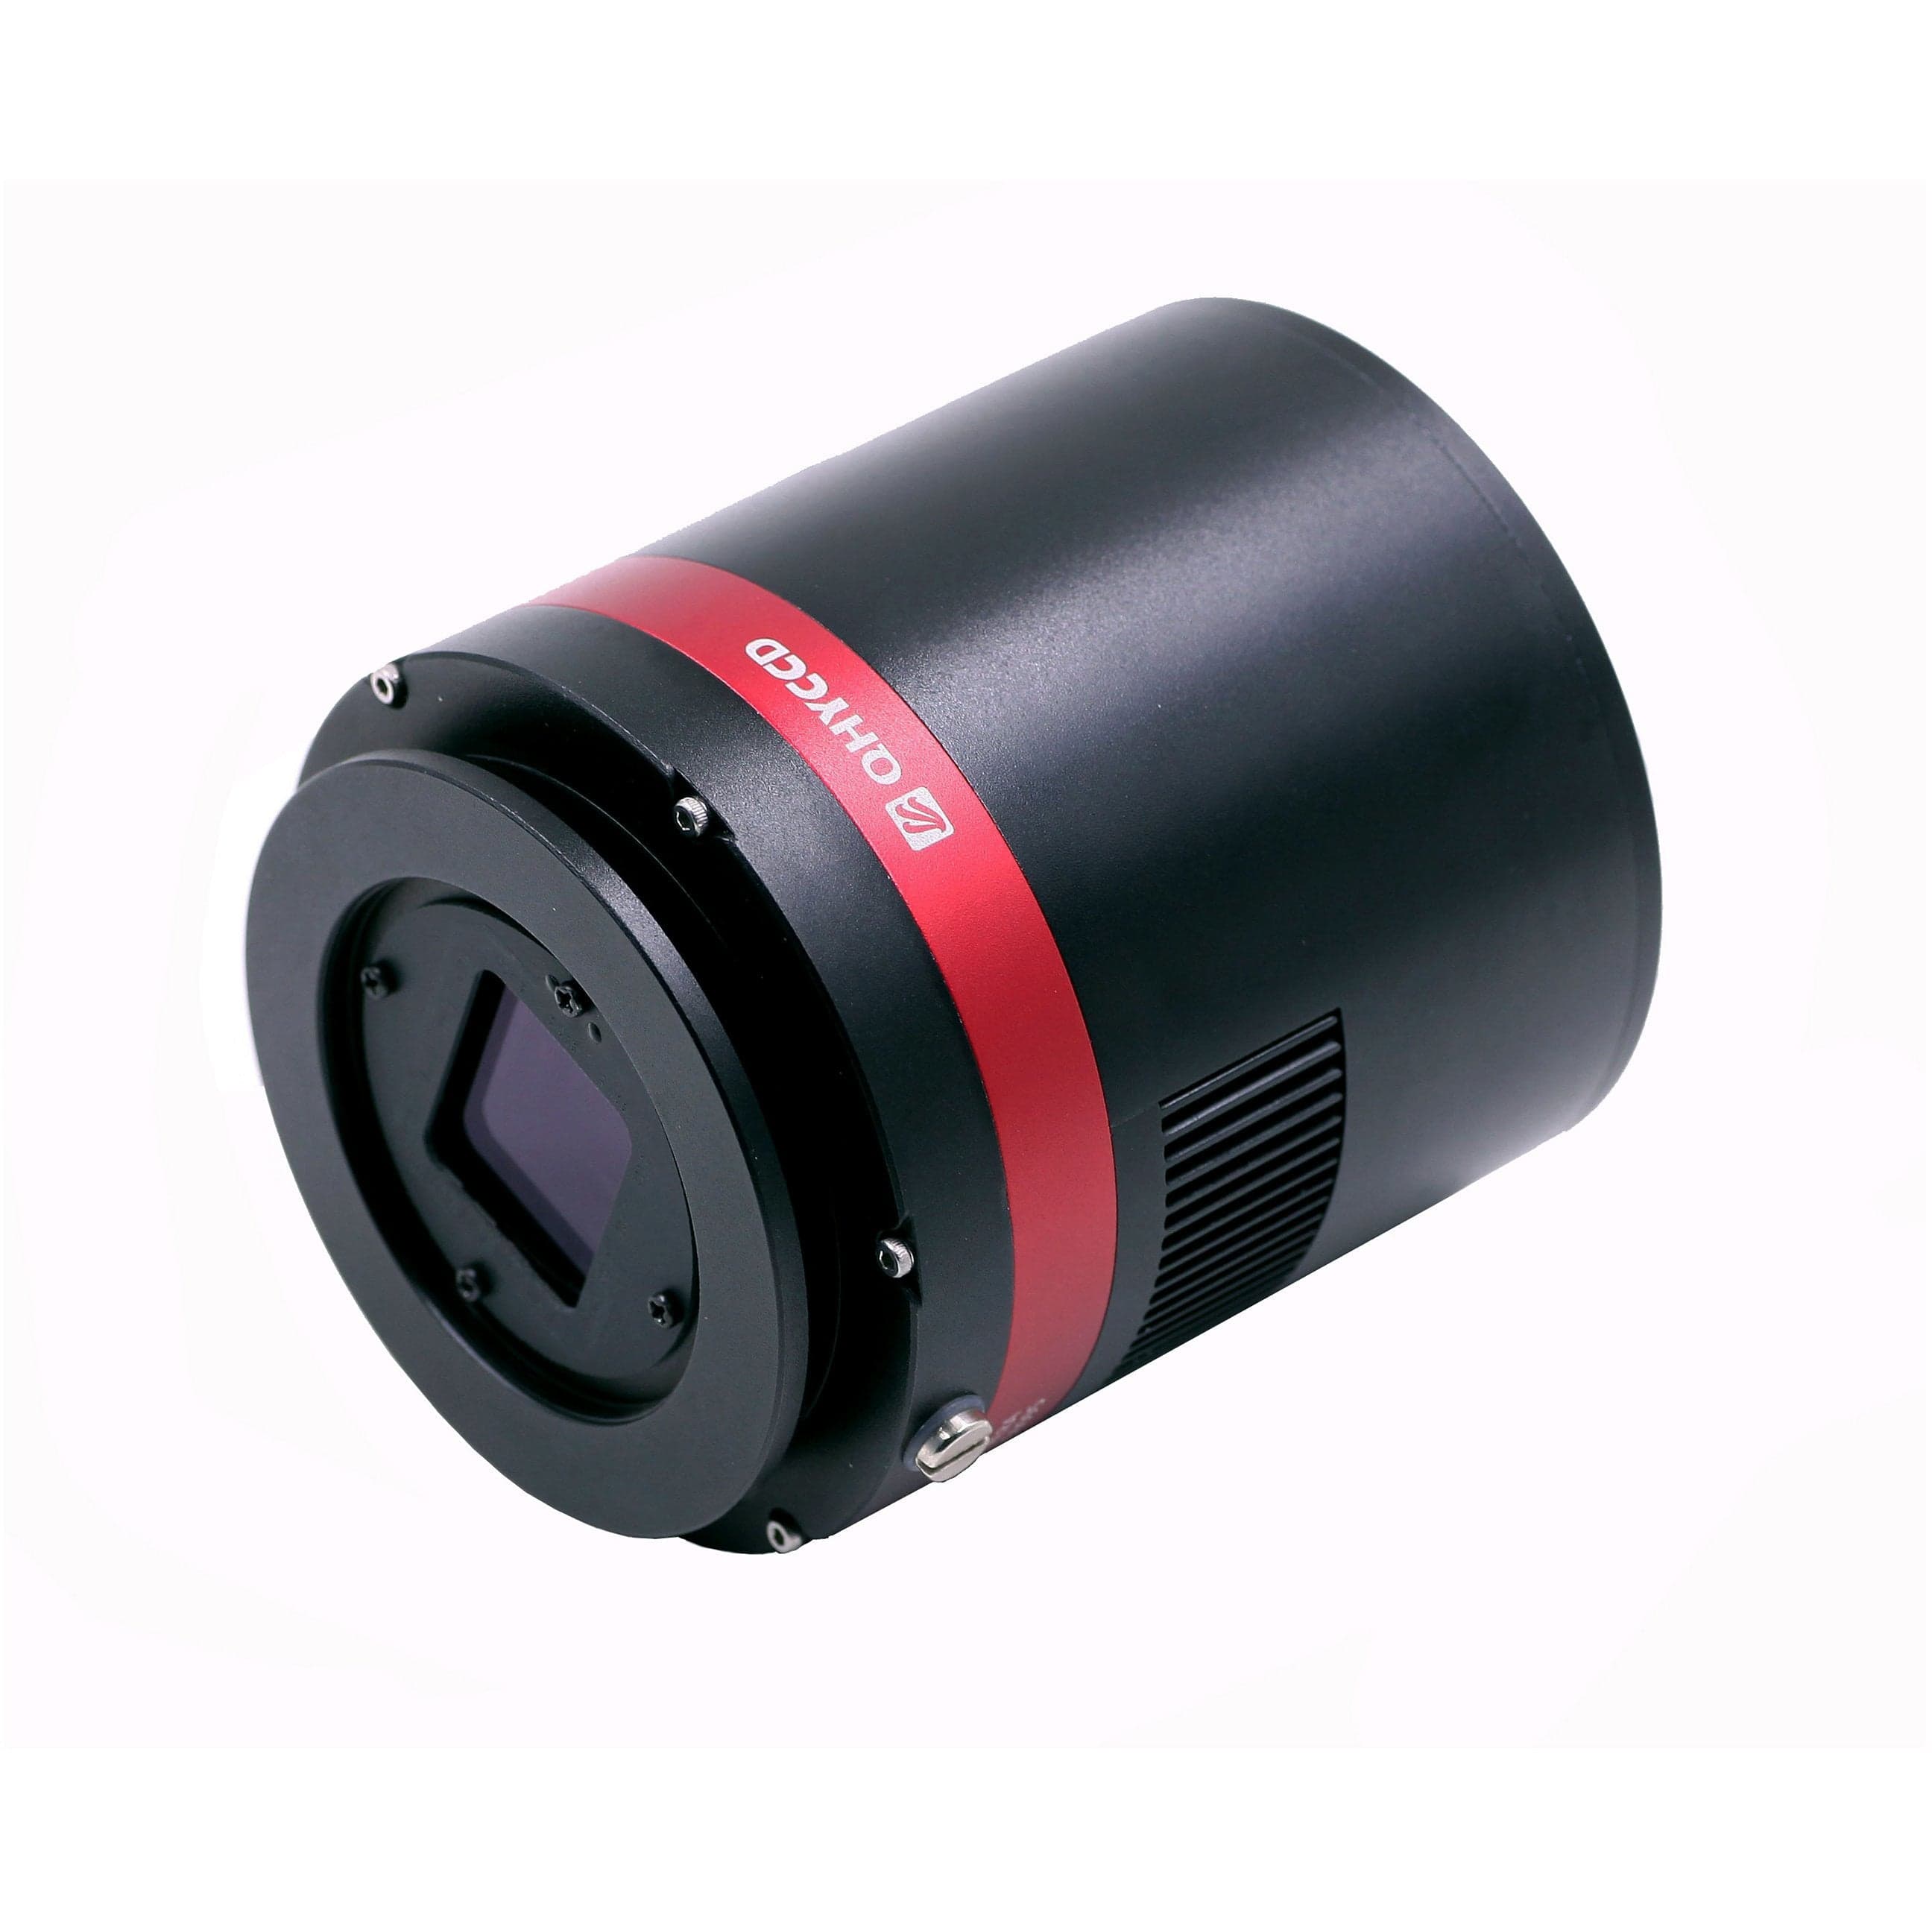 QHYCCD Camera QHYCCD QHY247C 24MP One-Shot Color Cooled CMOS Astrophotography Camera with Anti-Reflection Coating